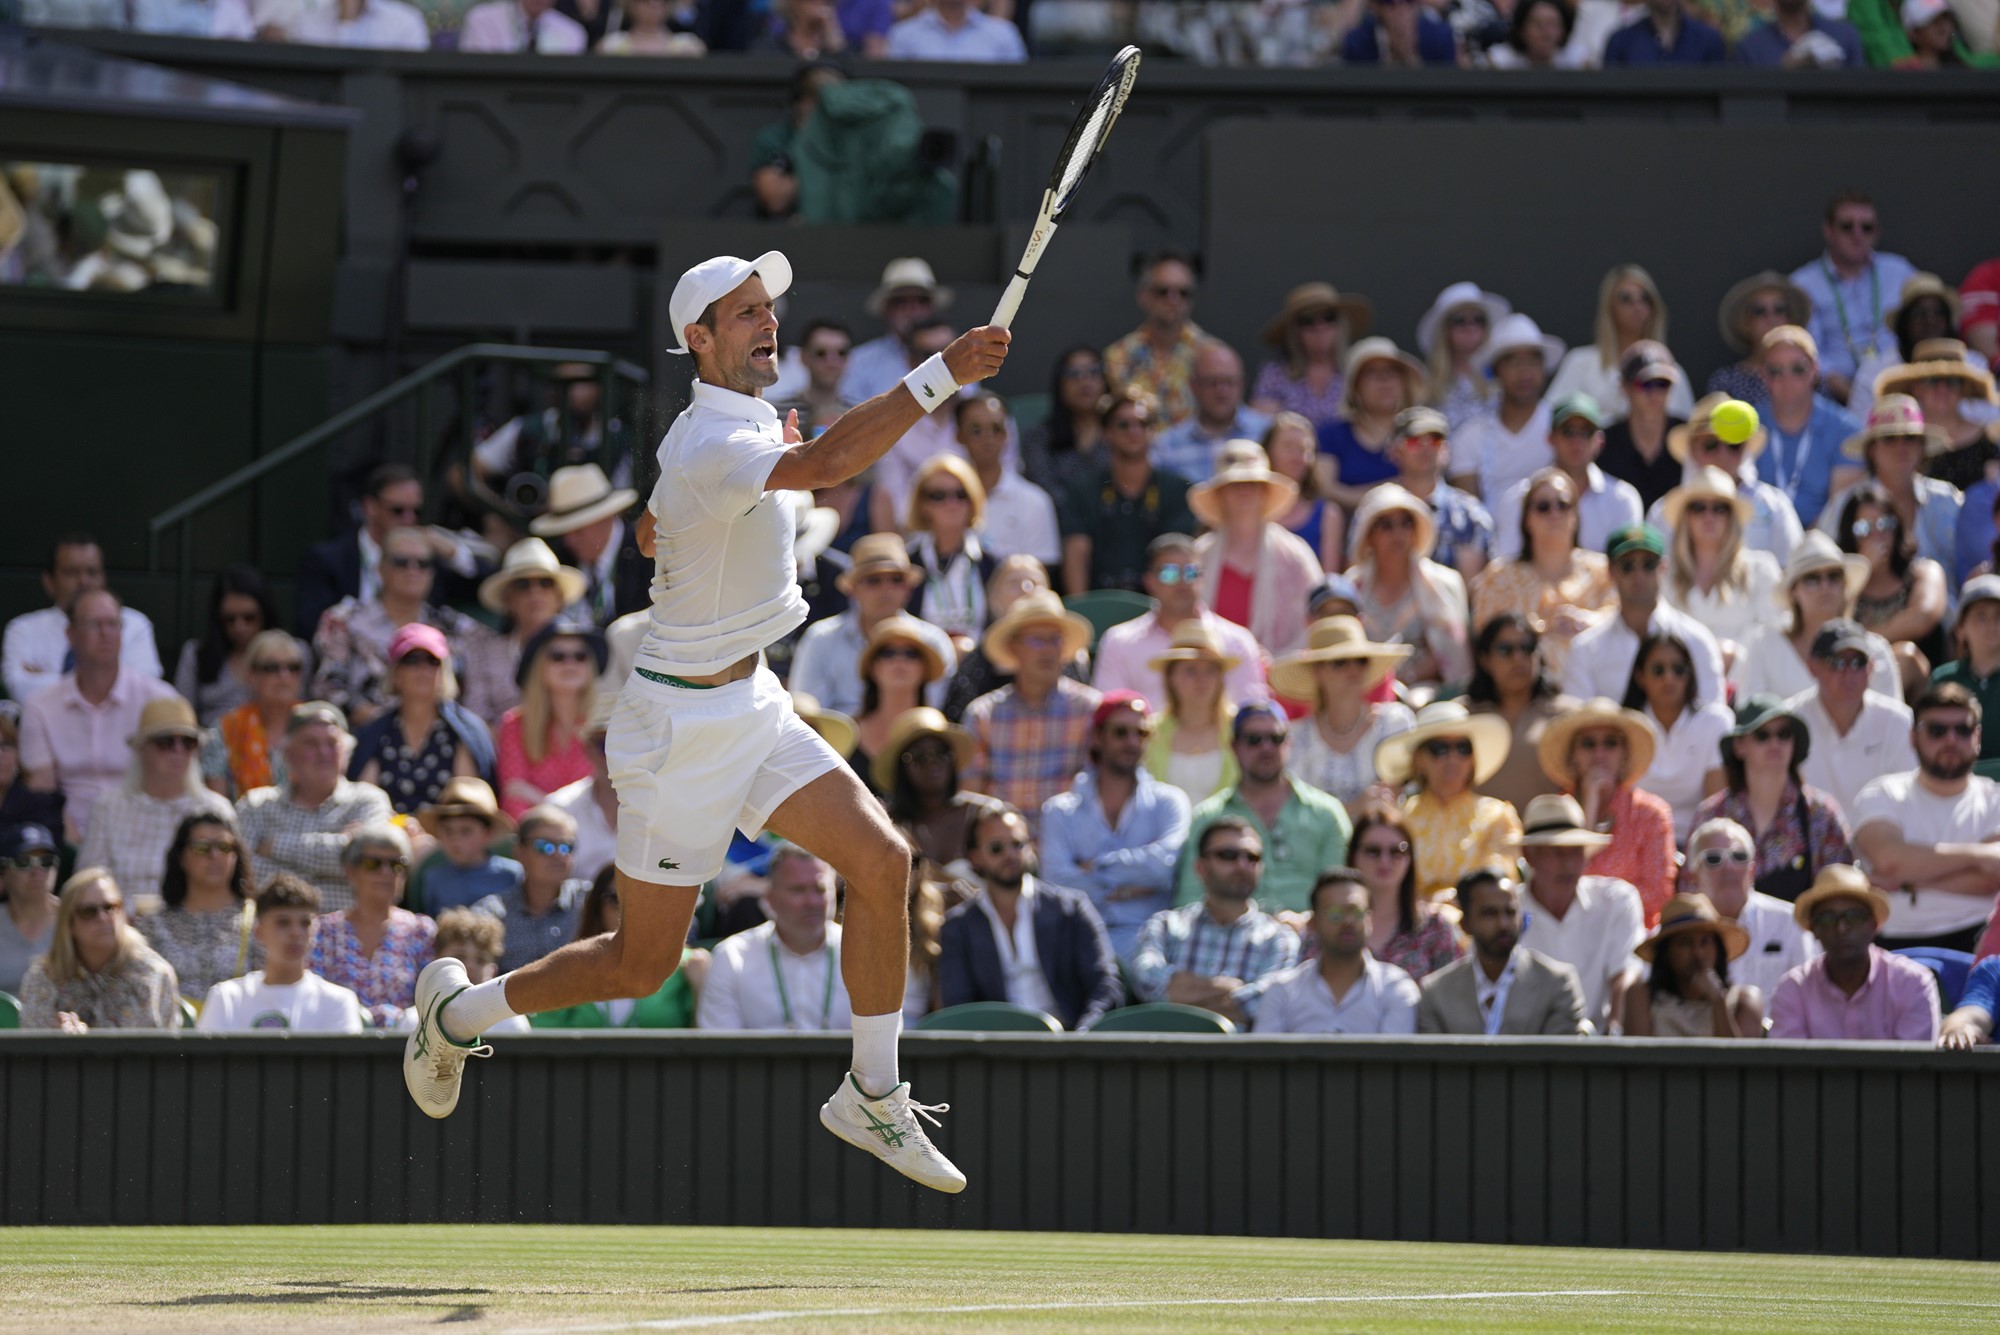 Novak Djokovic is off the ground as he hits a forehand in the Wimbledon final.